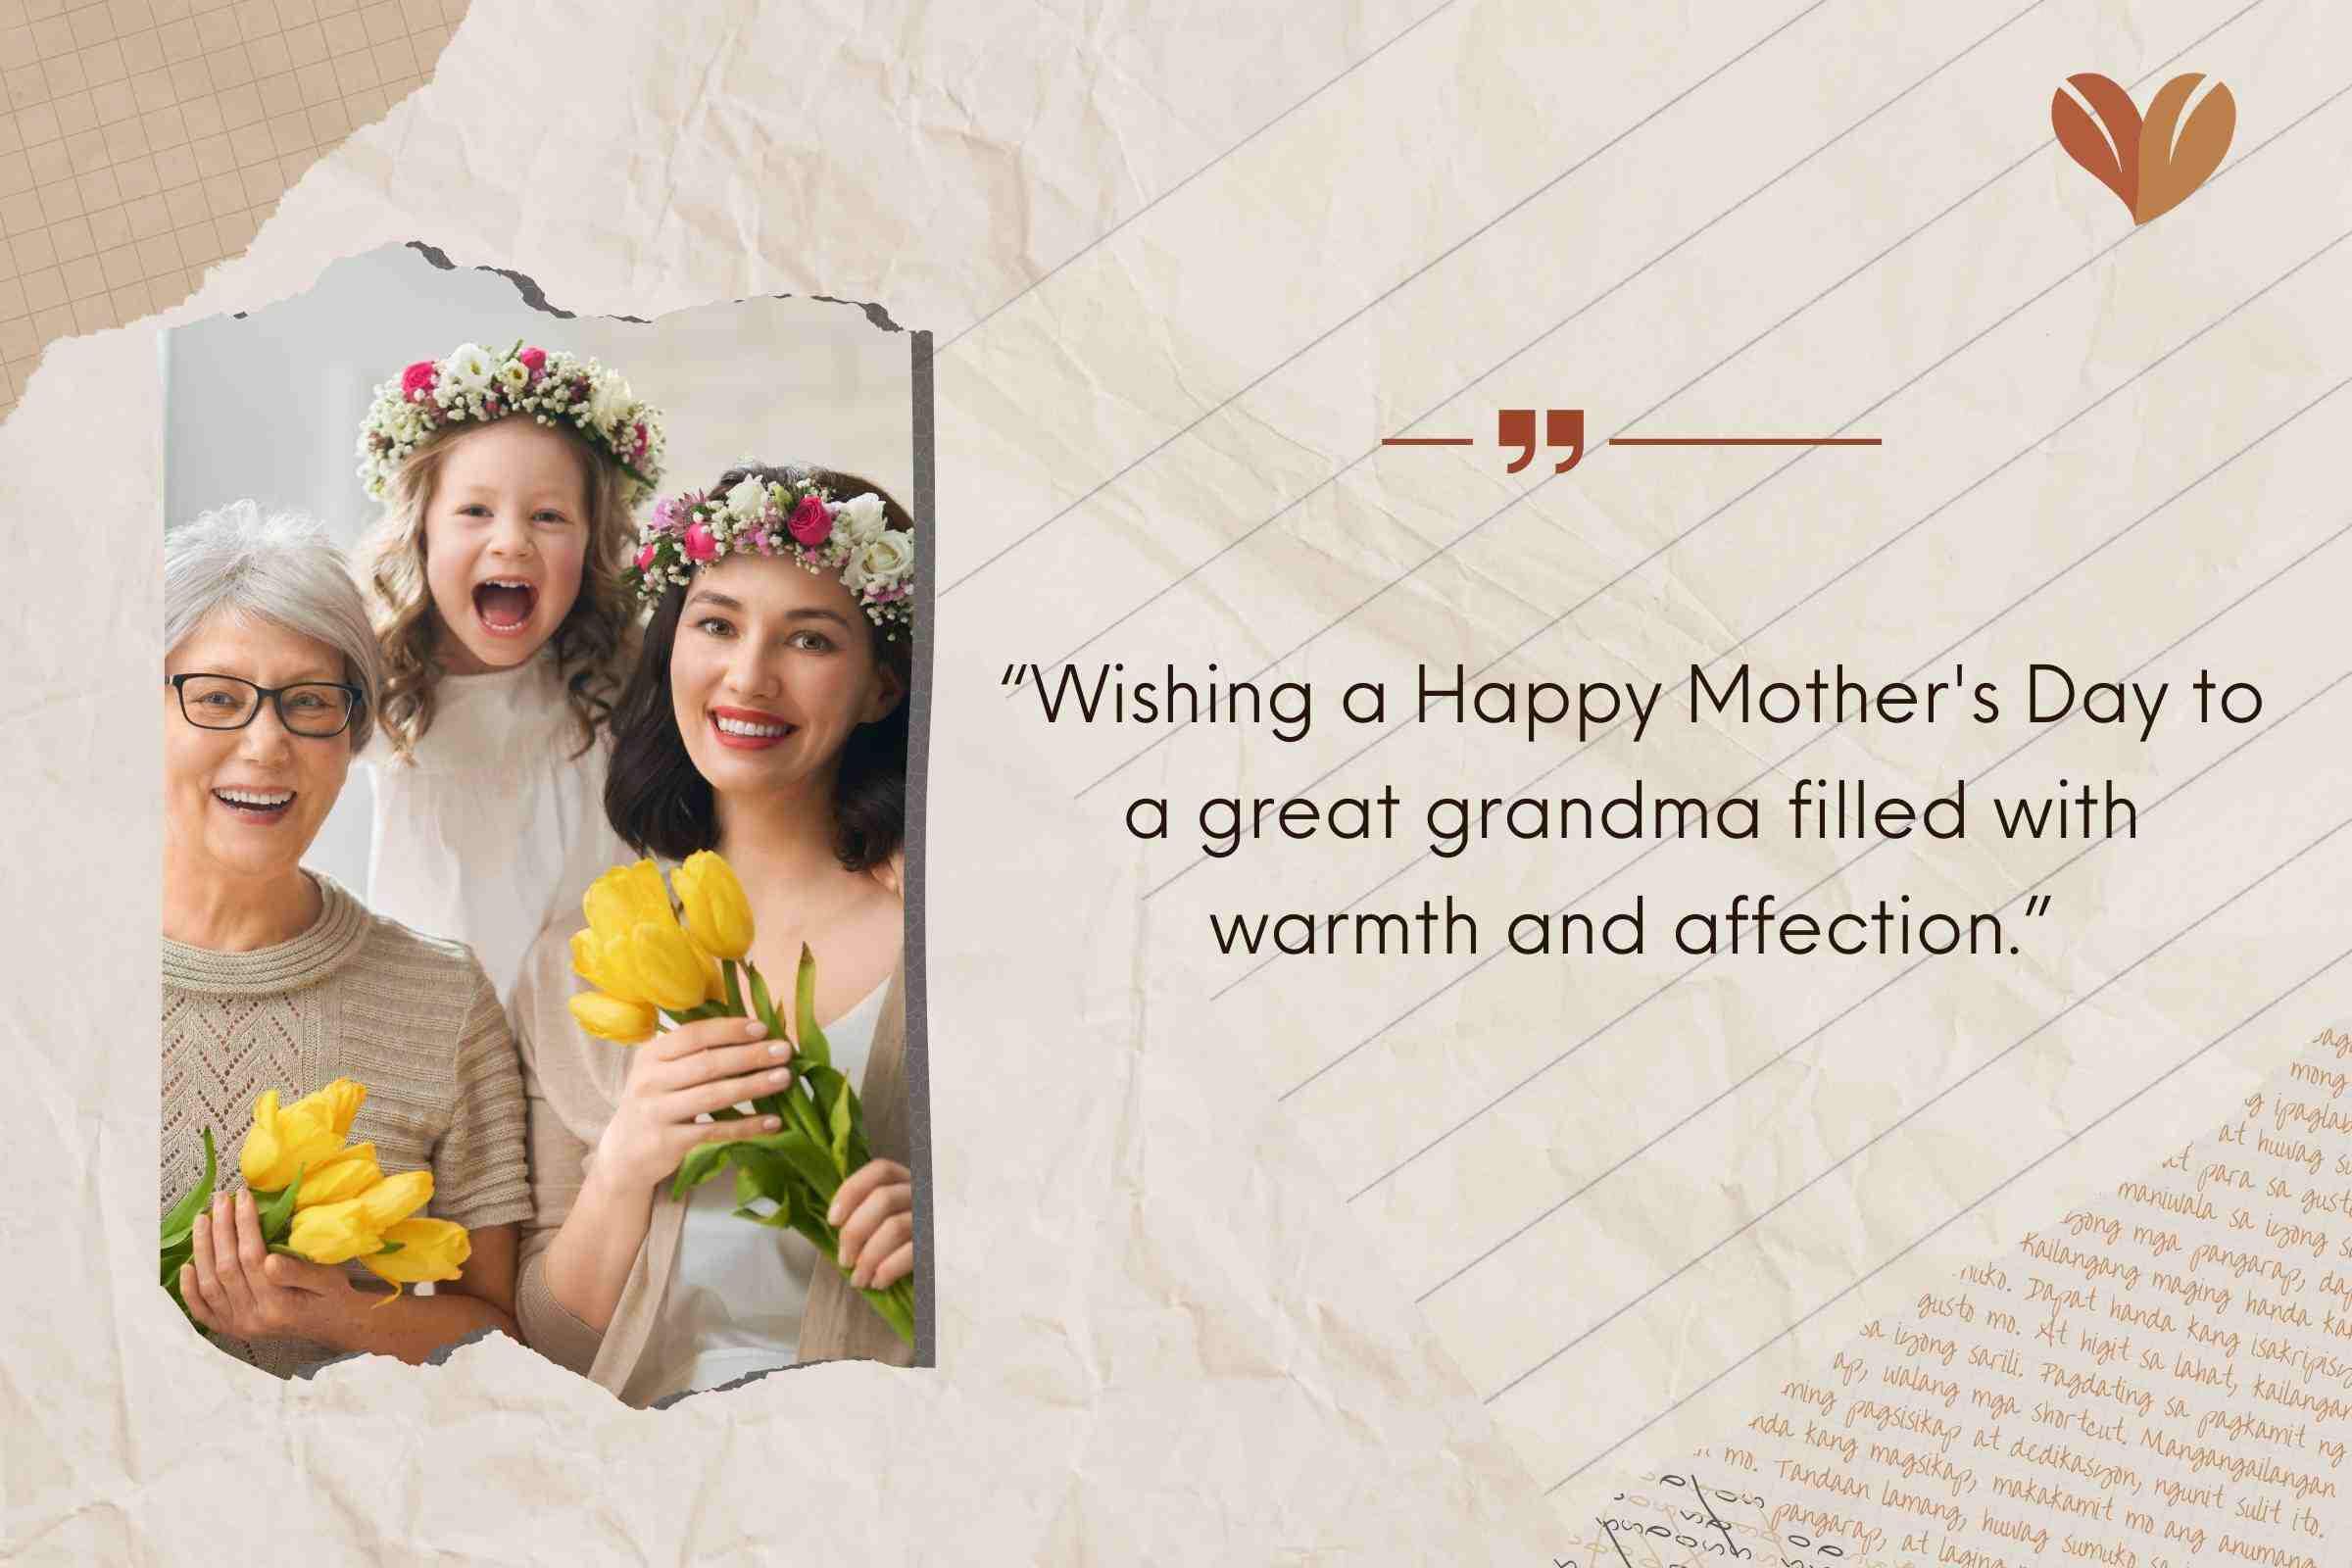 Short & Sweet with Memorable Mother's Day Messages for Great Grandma